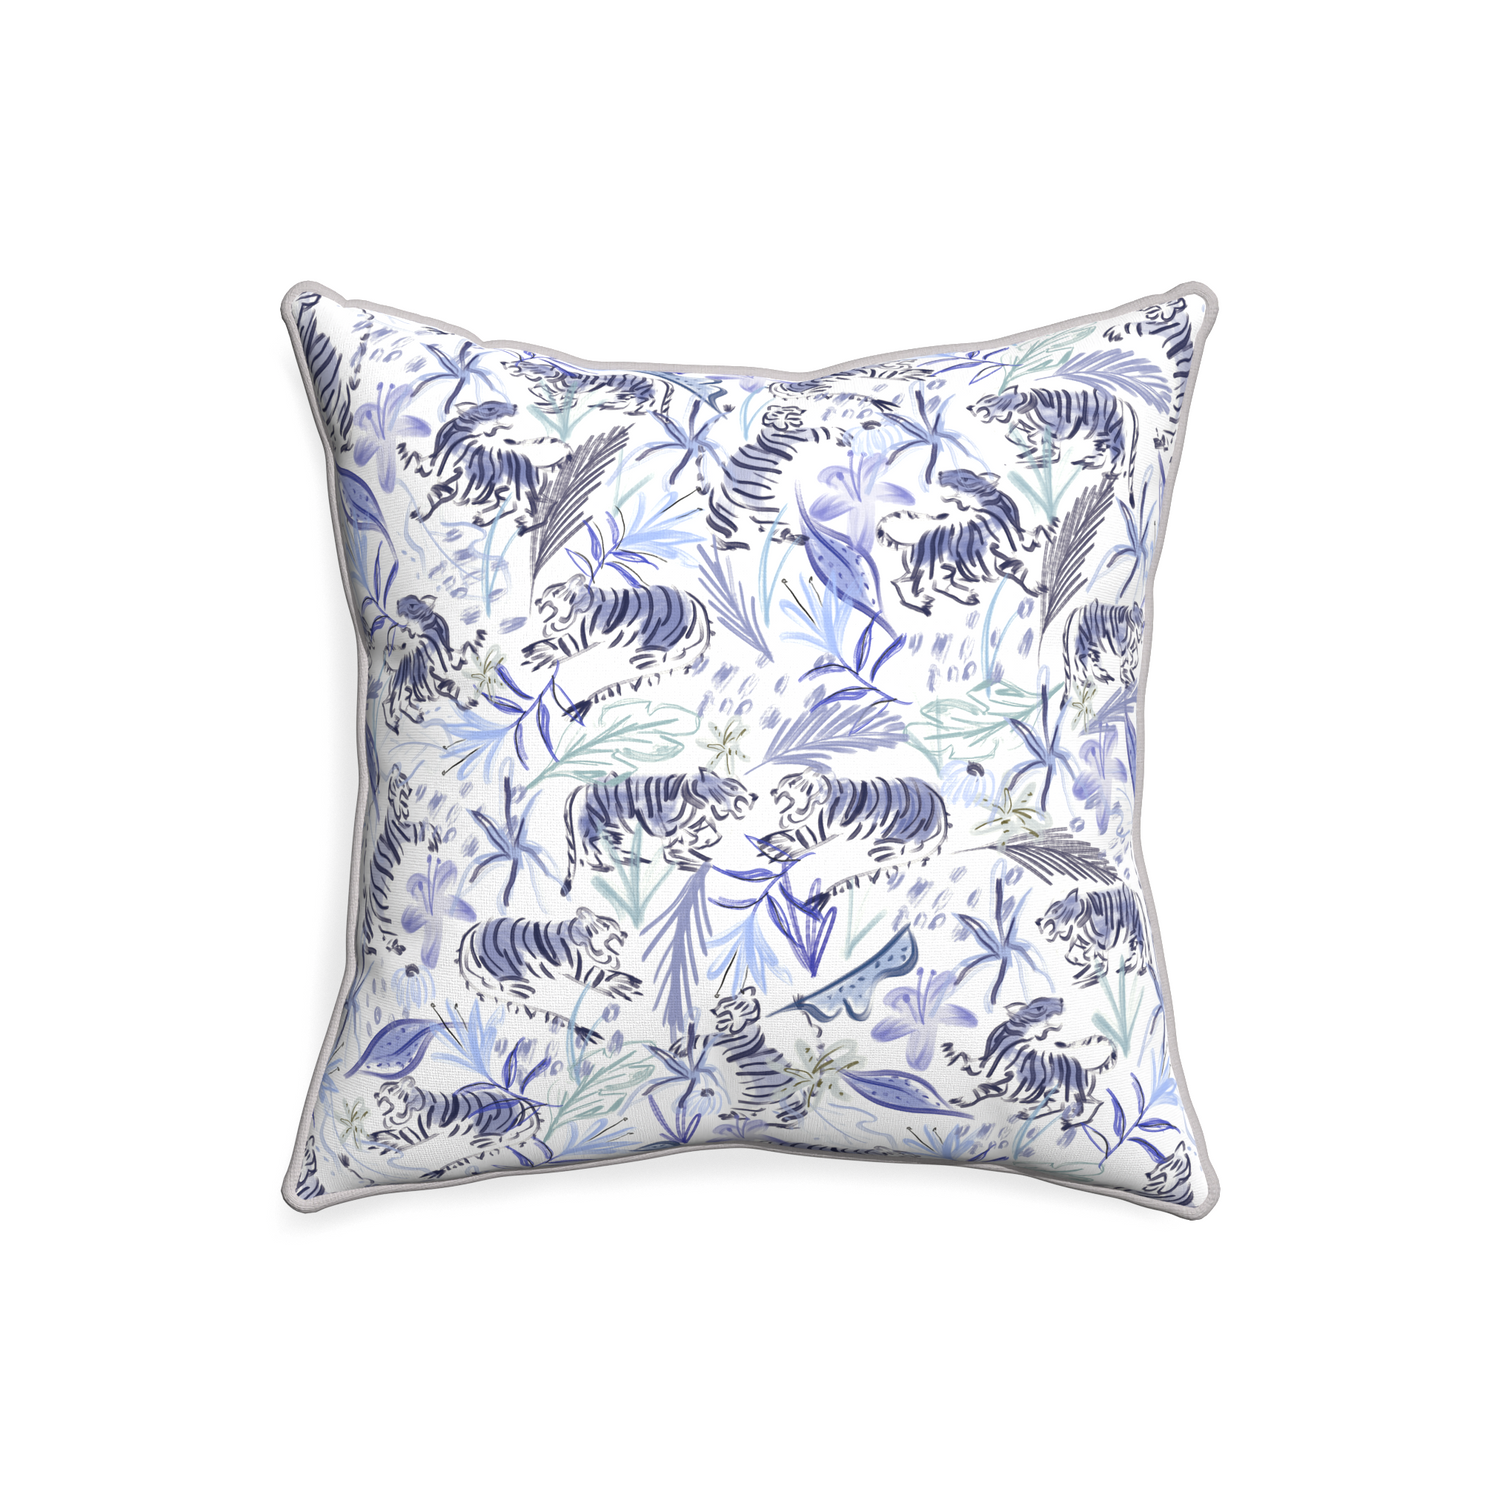 20-square frida blue custom blue with intricate tiger designpillow with pebble piping on white background